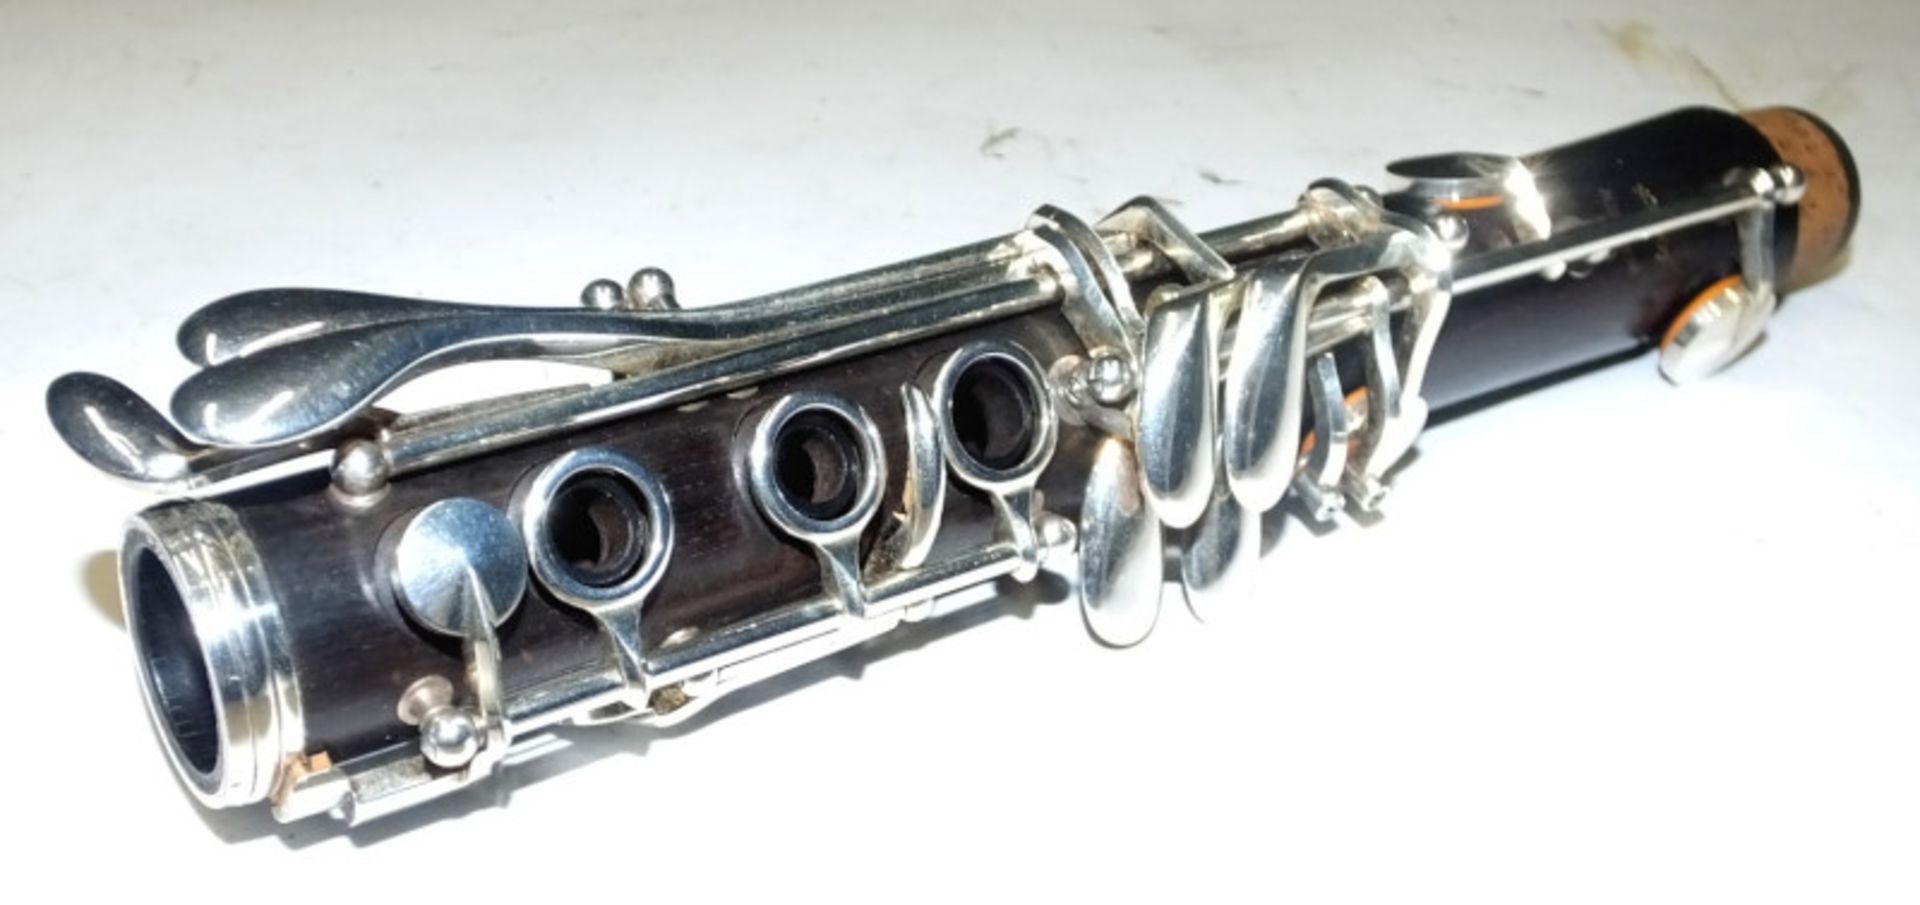 Howarth S2 Clarinet in case - Serial Number - 2153. - Image 12 of 22